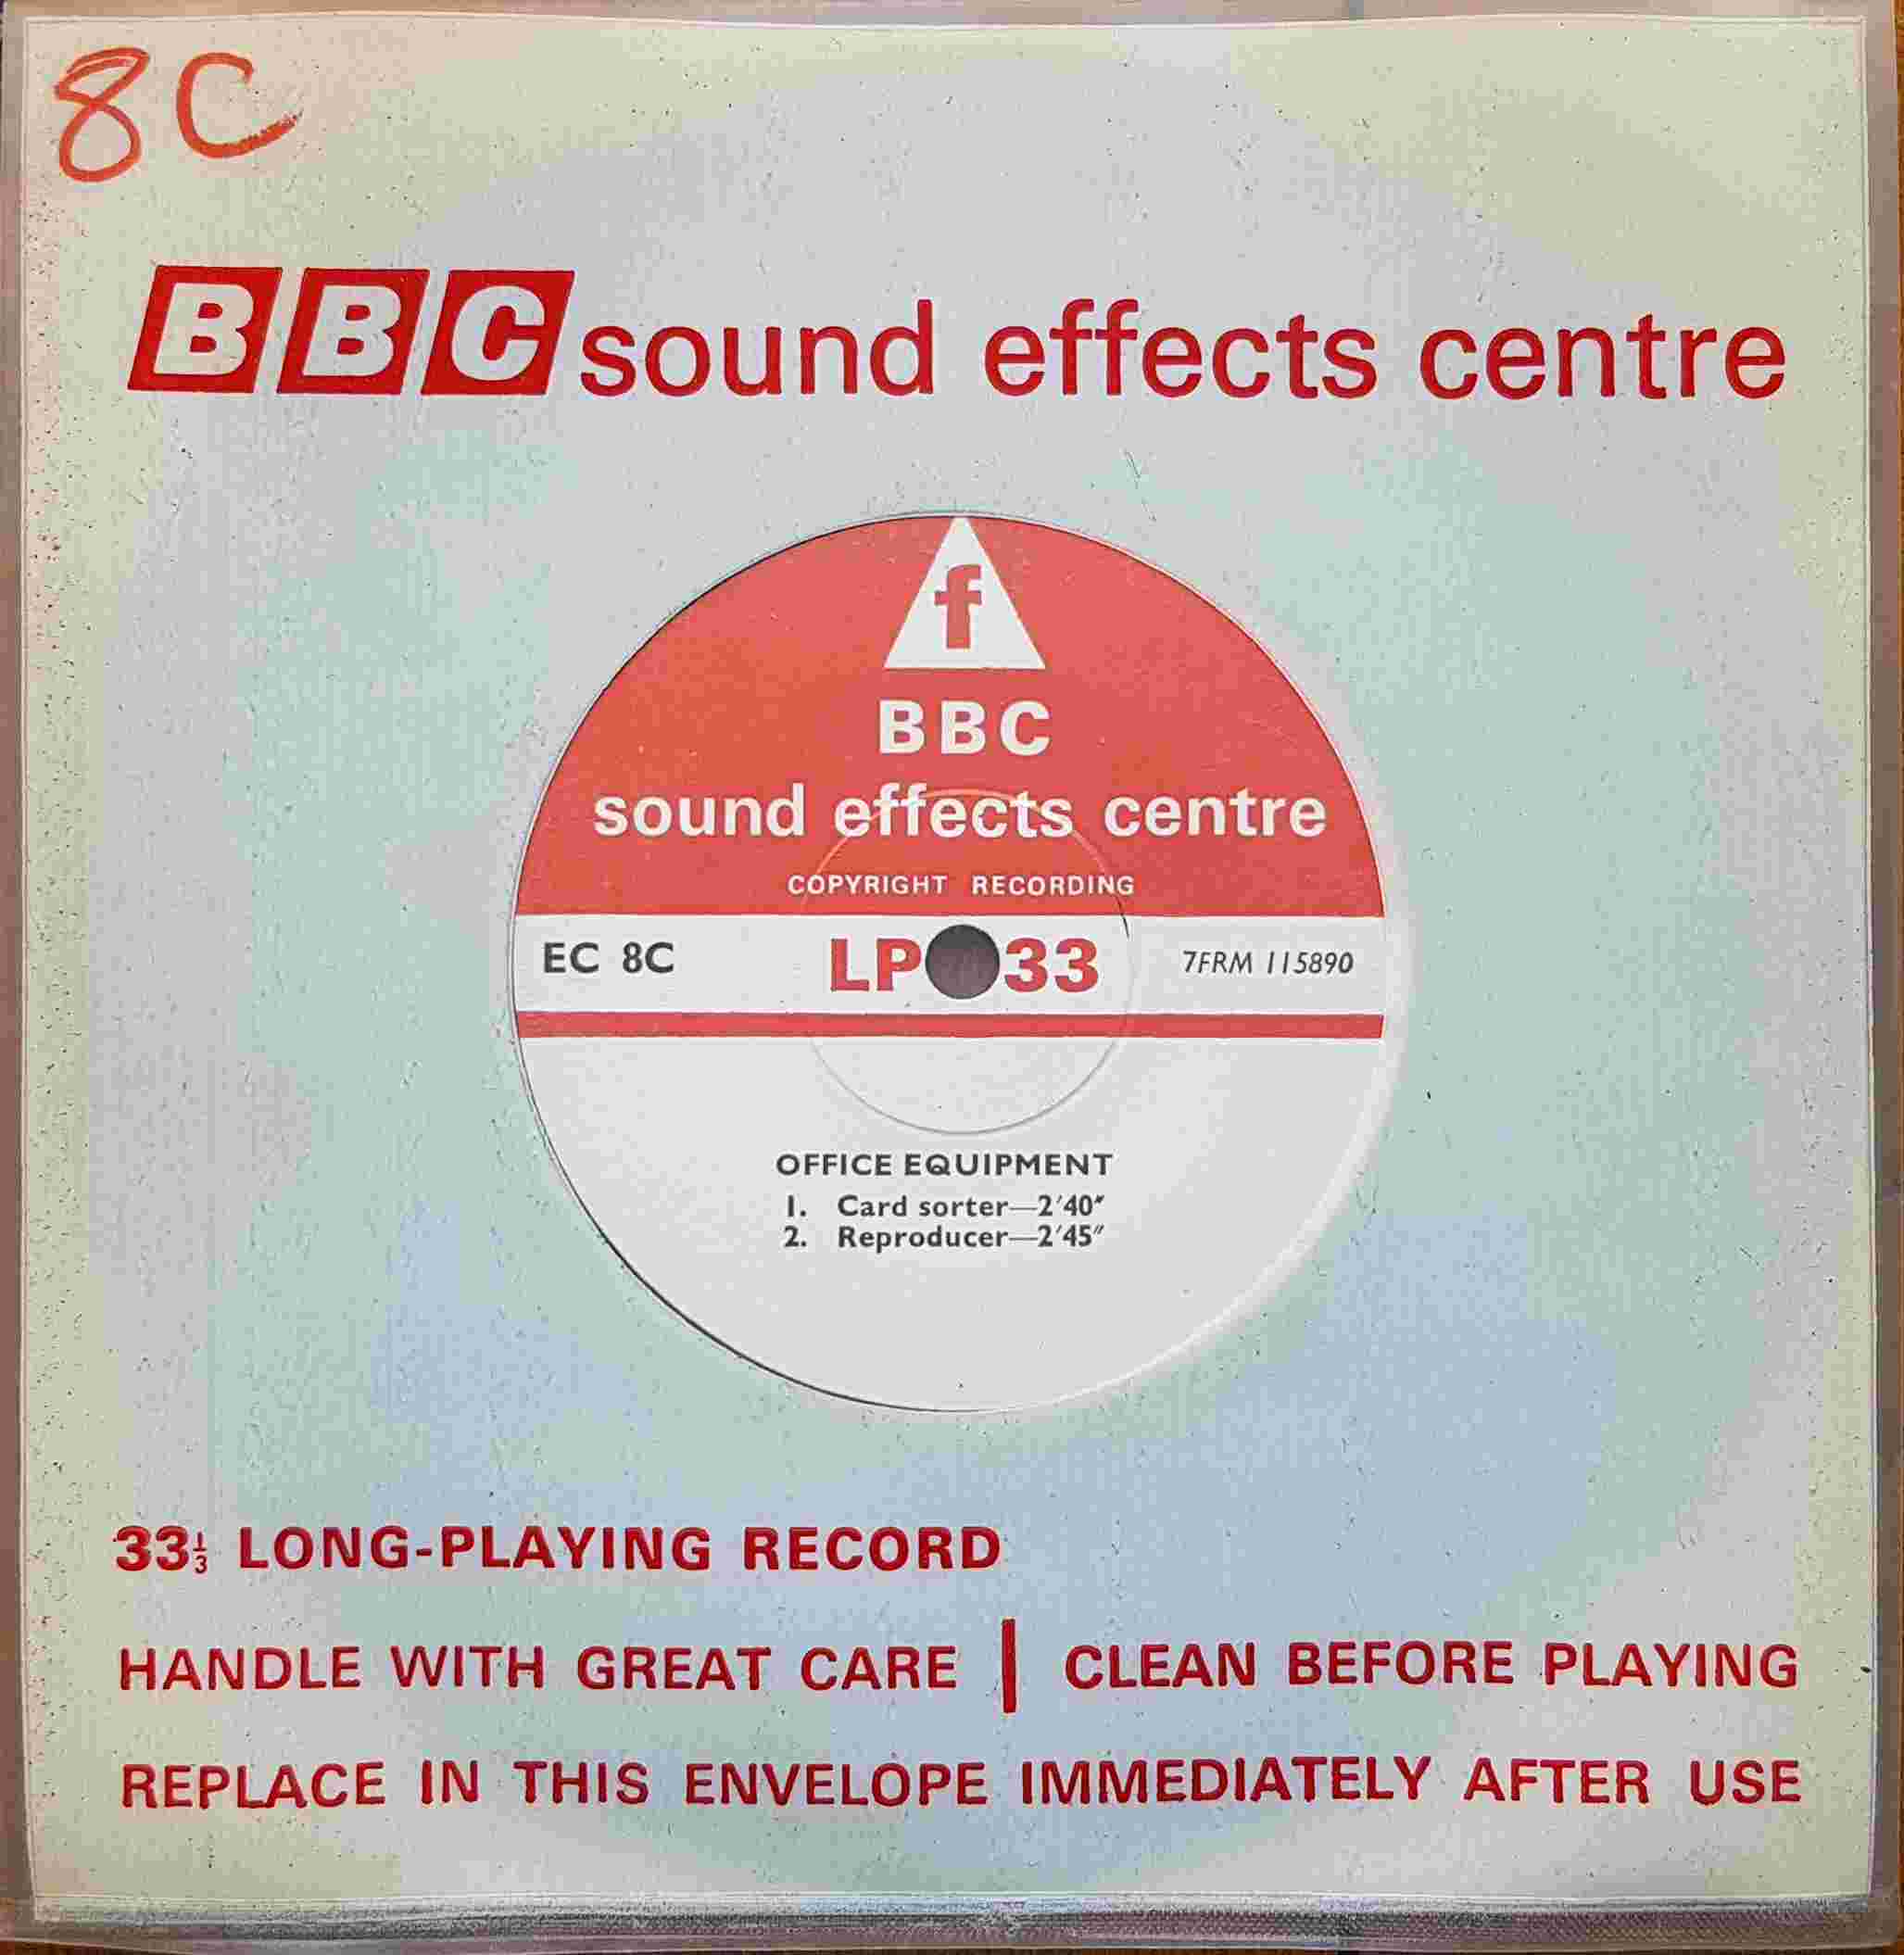 Picture of EC 8C Office equipment by artist Not registered from the BBC records and Tapes library